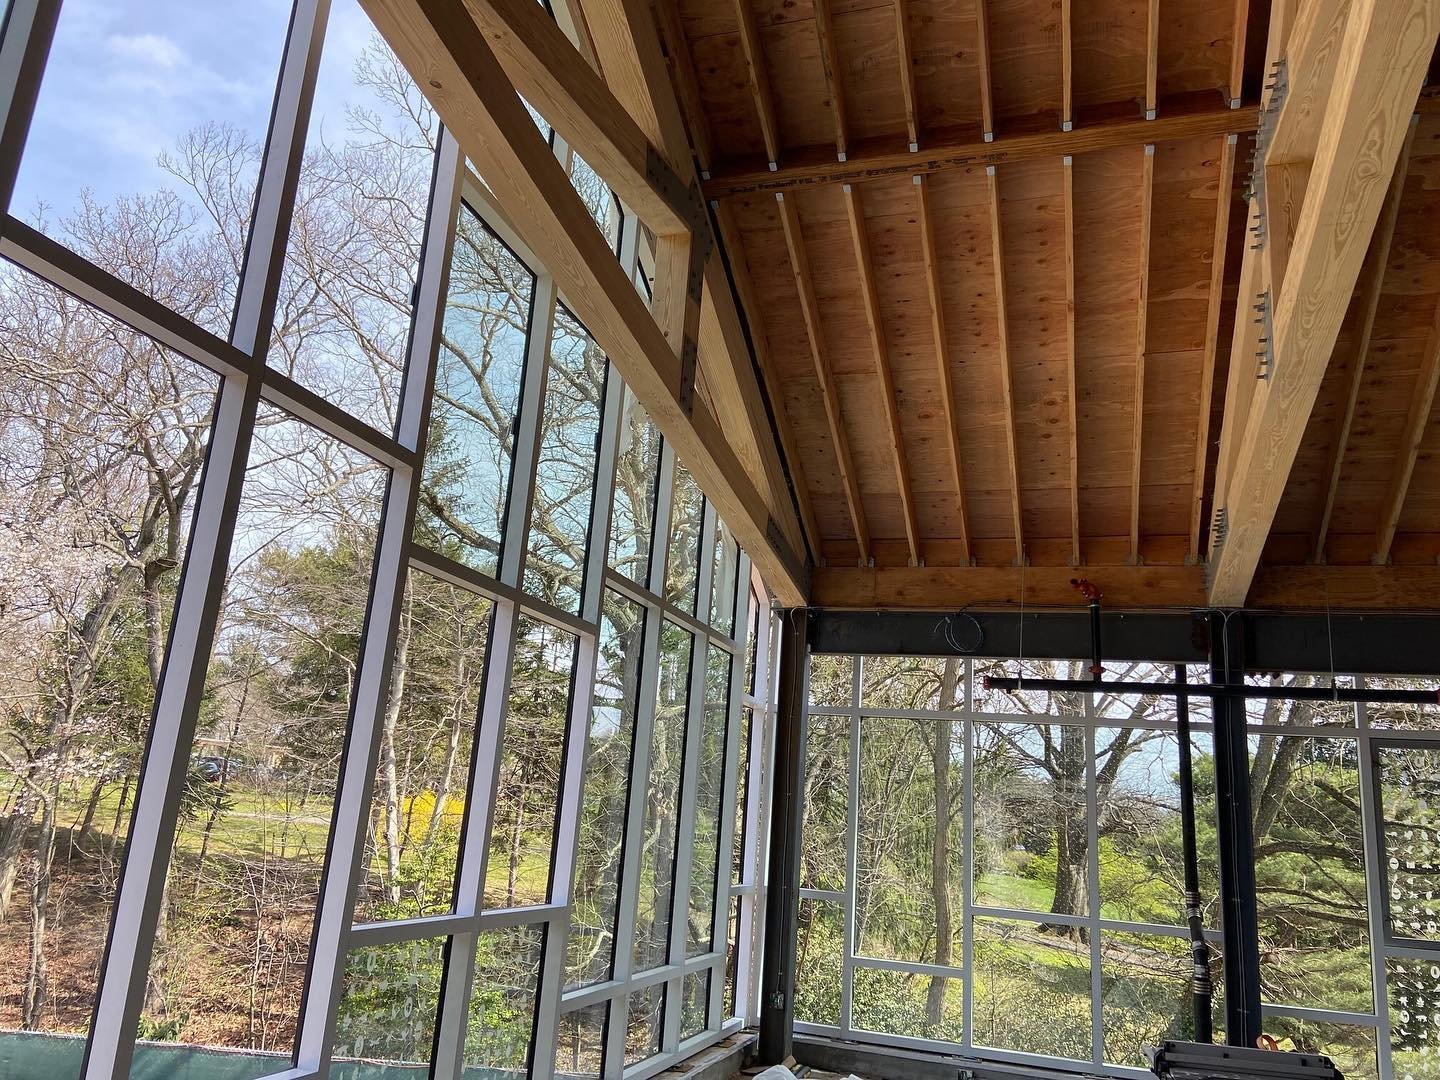 It&rsquo;s springtime and the windows in the new library building are looking gorgeous! The windows will be fritted with a special pattern that will combine aesthetics with functionality: the fritting will prevent birds from flying into the windows, 